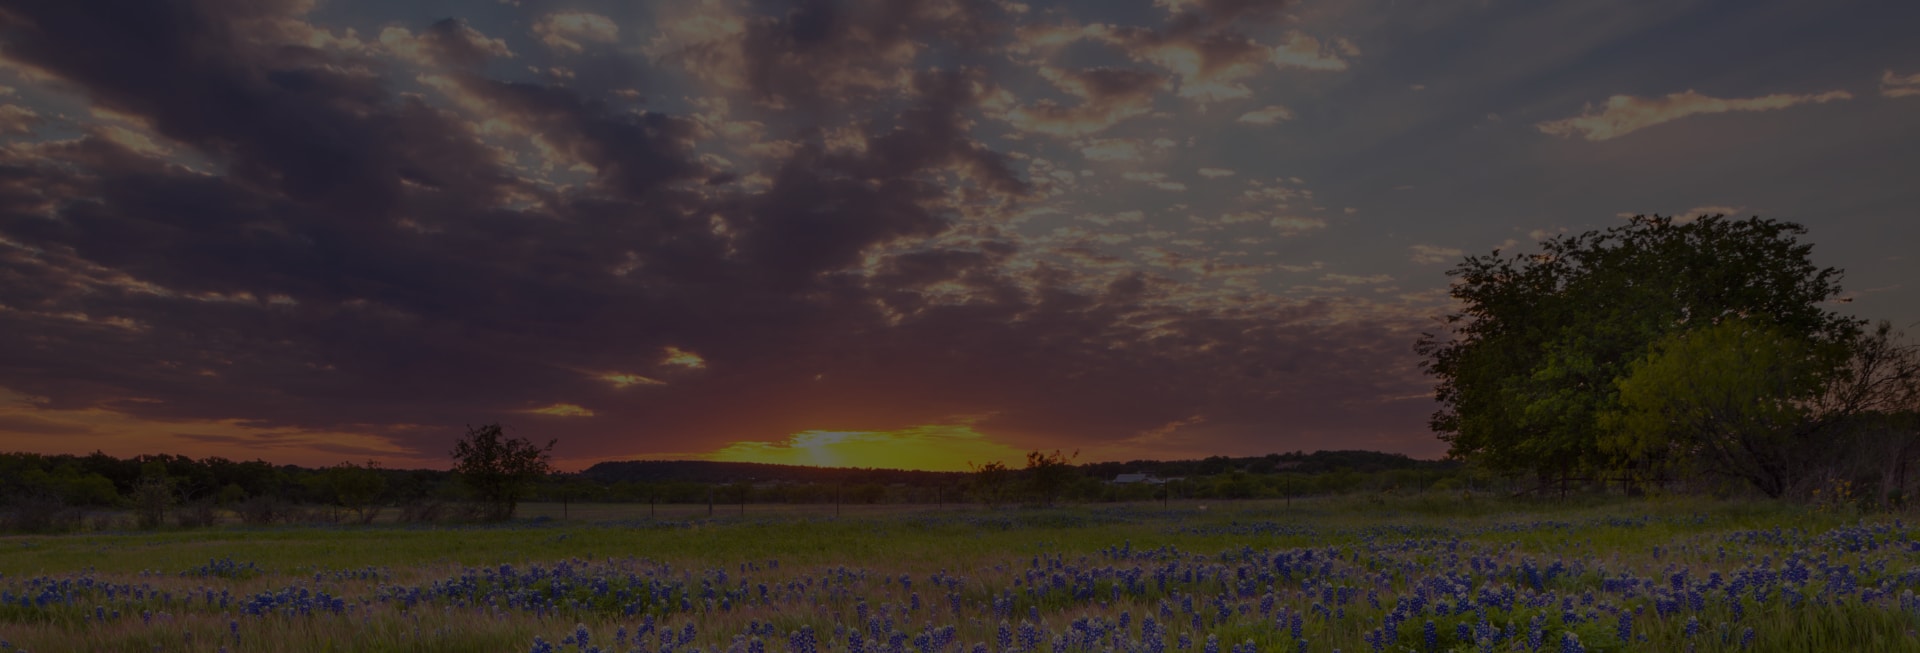 field full of lavender flowers in front of the setting sun in Wichita Falls, Texas